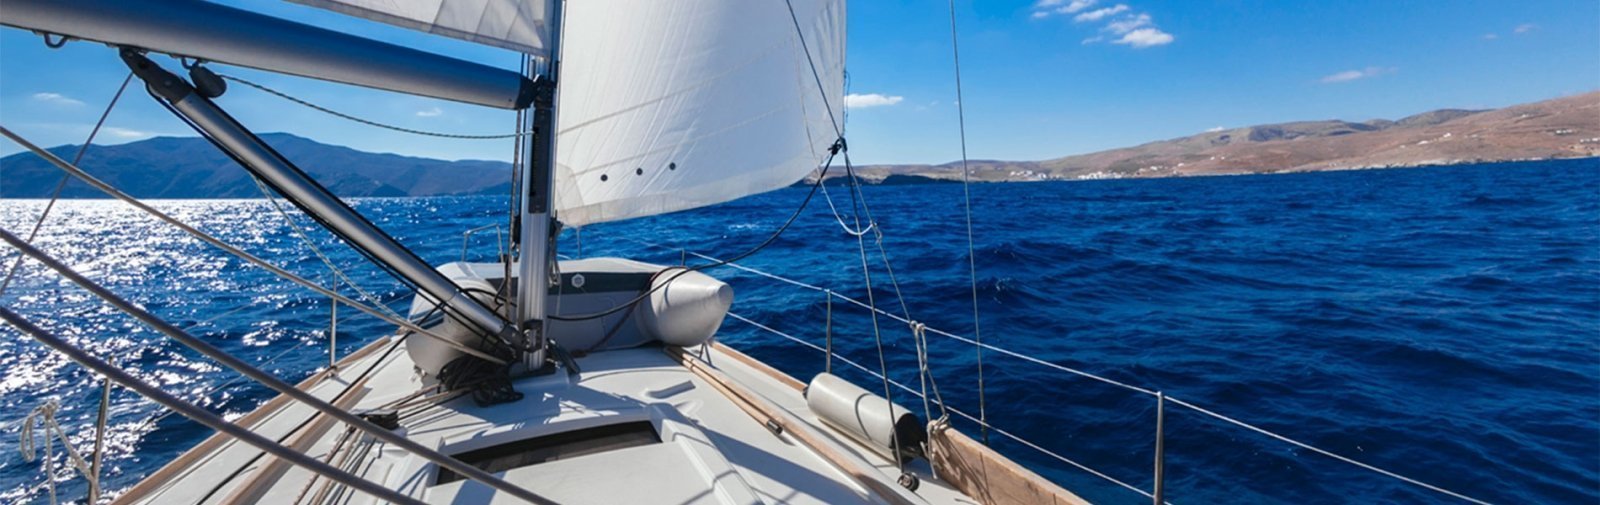 Excursions in Tenerife - private yacht charter